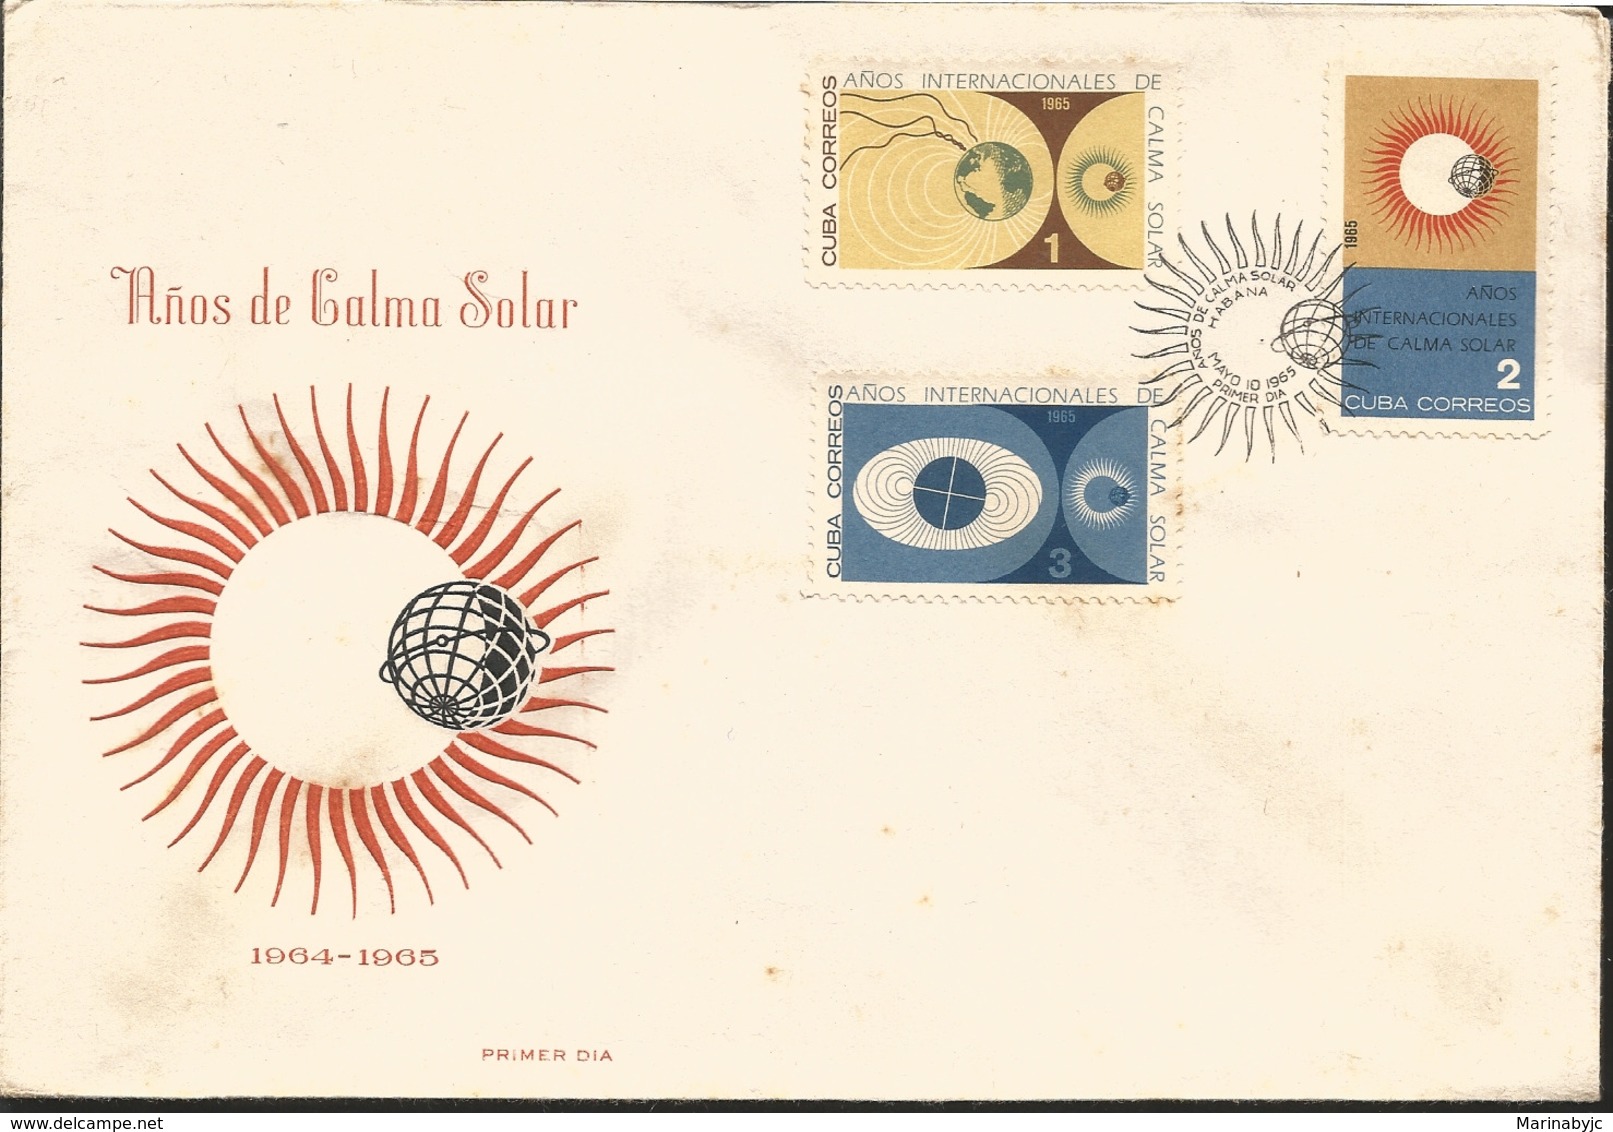 V) 1965 CARIBBEAN, INTERNATIONAL QUIET SUN YEAR, MAGNETIC POLE, SUN, EARTH’S, WITH SLOGAN CANCELATION IN BLACK, FDC - Briefe U. Dokumente